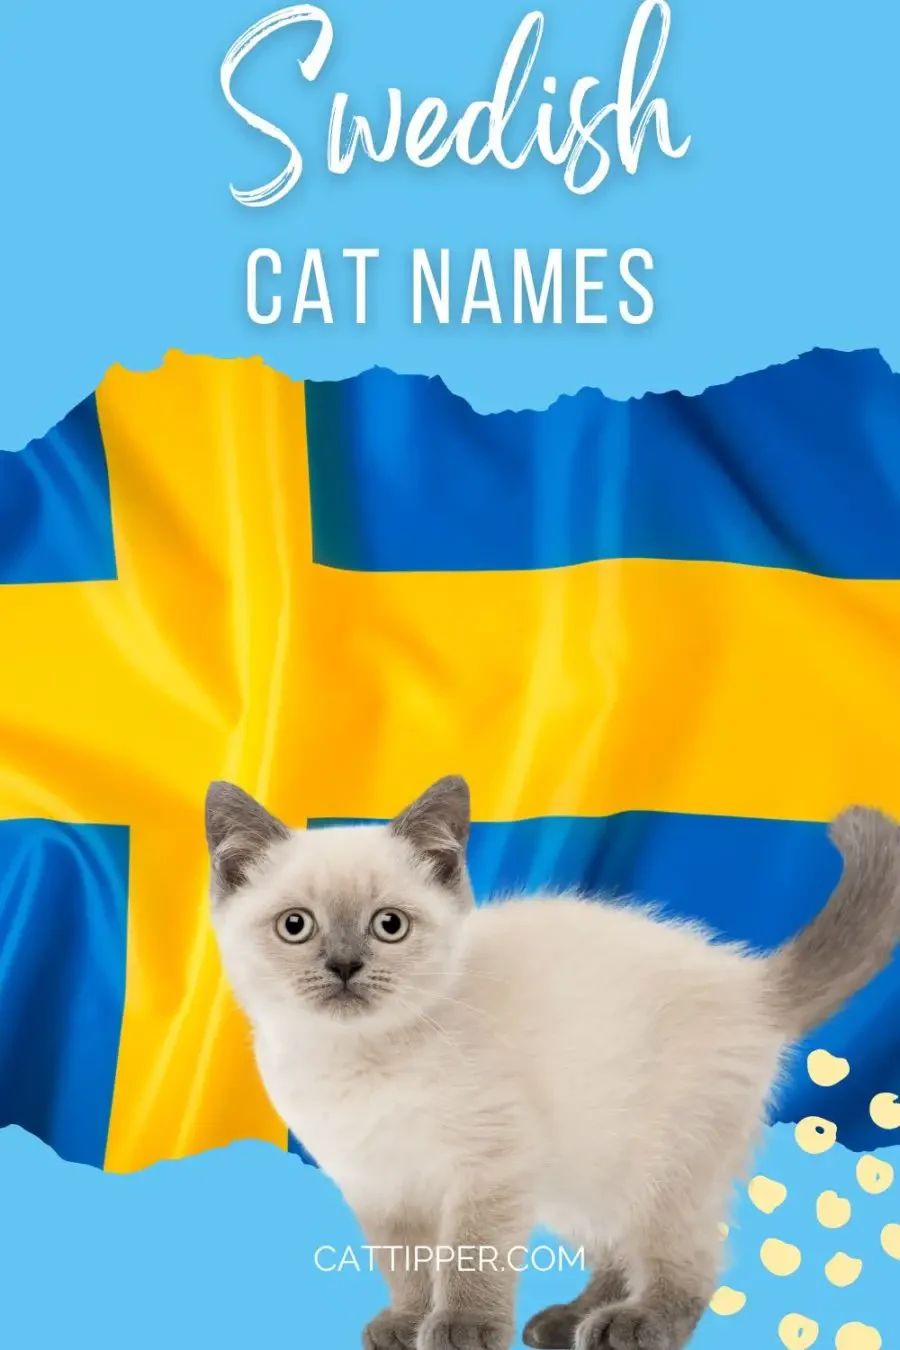 Swedish cat names -- photo of kitten with background of flag of Sweden